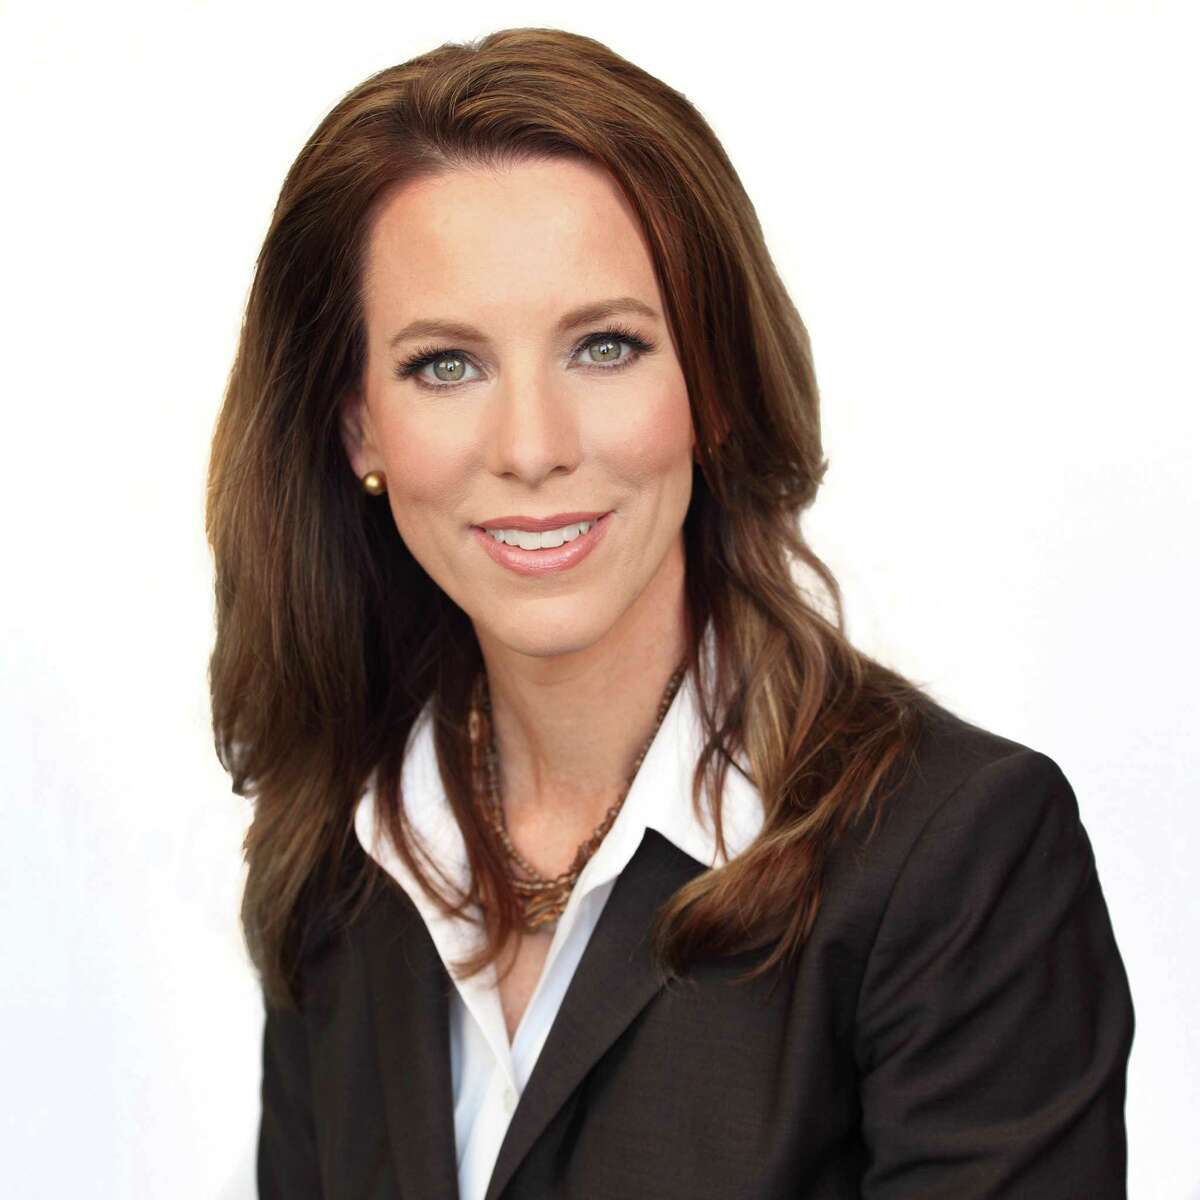 Renee Flores is the 2016 chairman of the San Antonio Chamber.